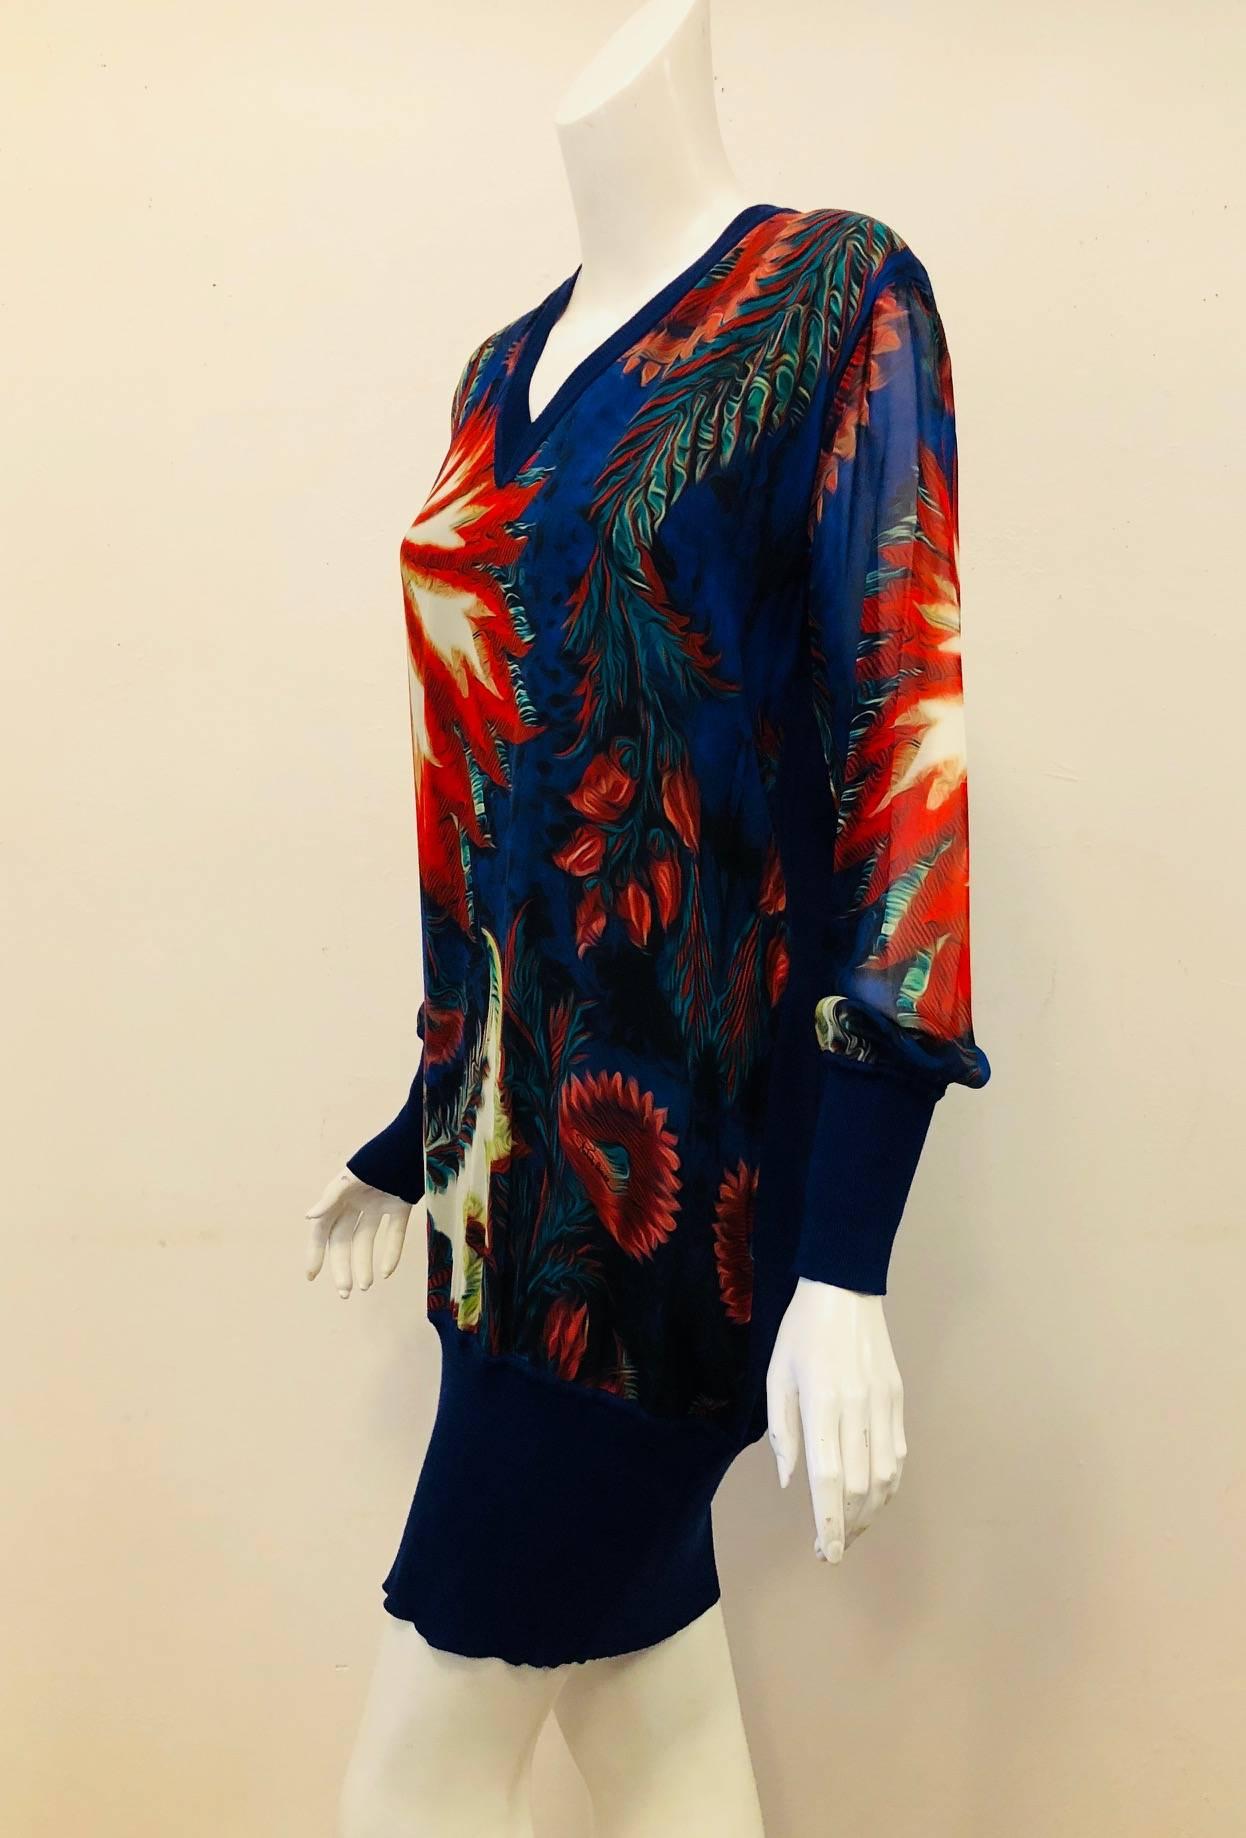 Roberto Cavalli's floral print with bright royal blue wool knit and enlarged photographic floral print at front and sleeves, in a rich multicolored palette, this silk dress has us dreaming of flourishing gardens and outdoor parties.   The bright